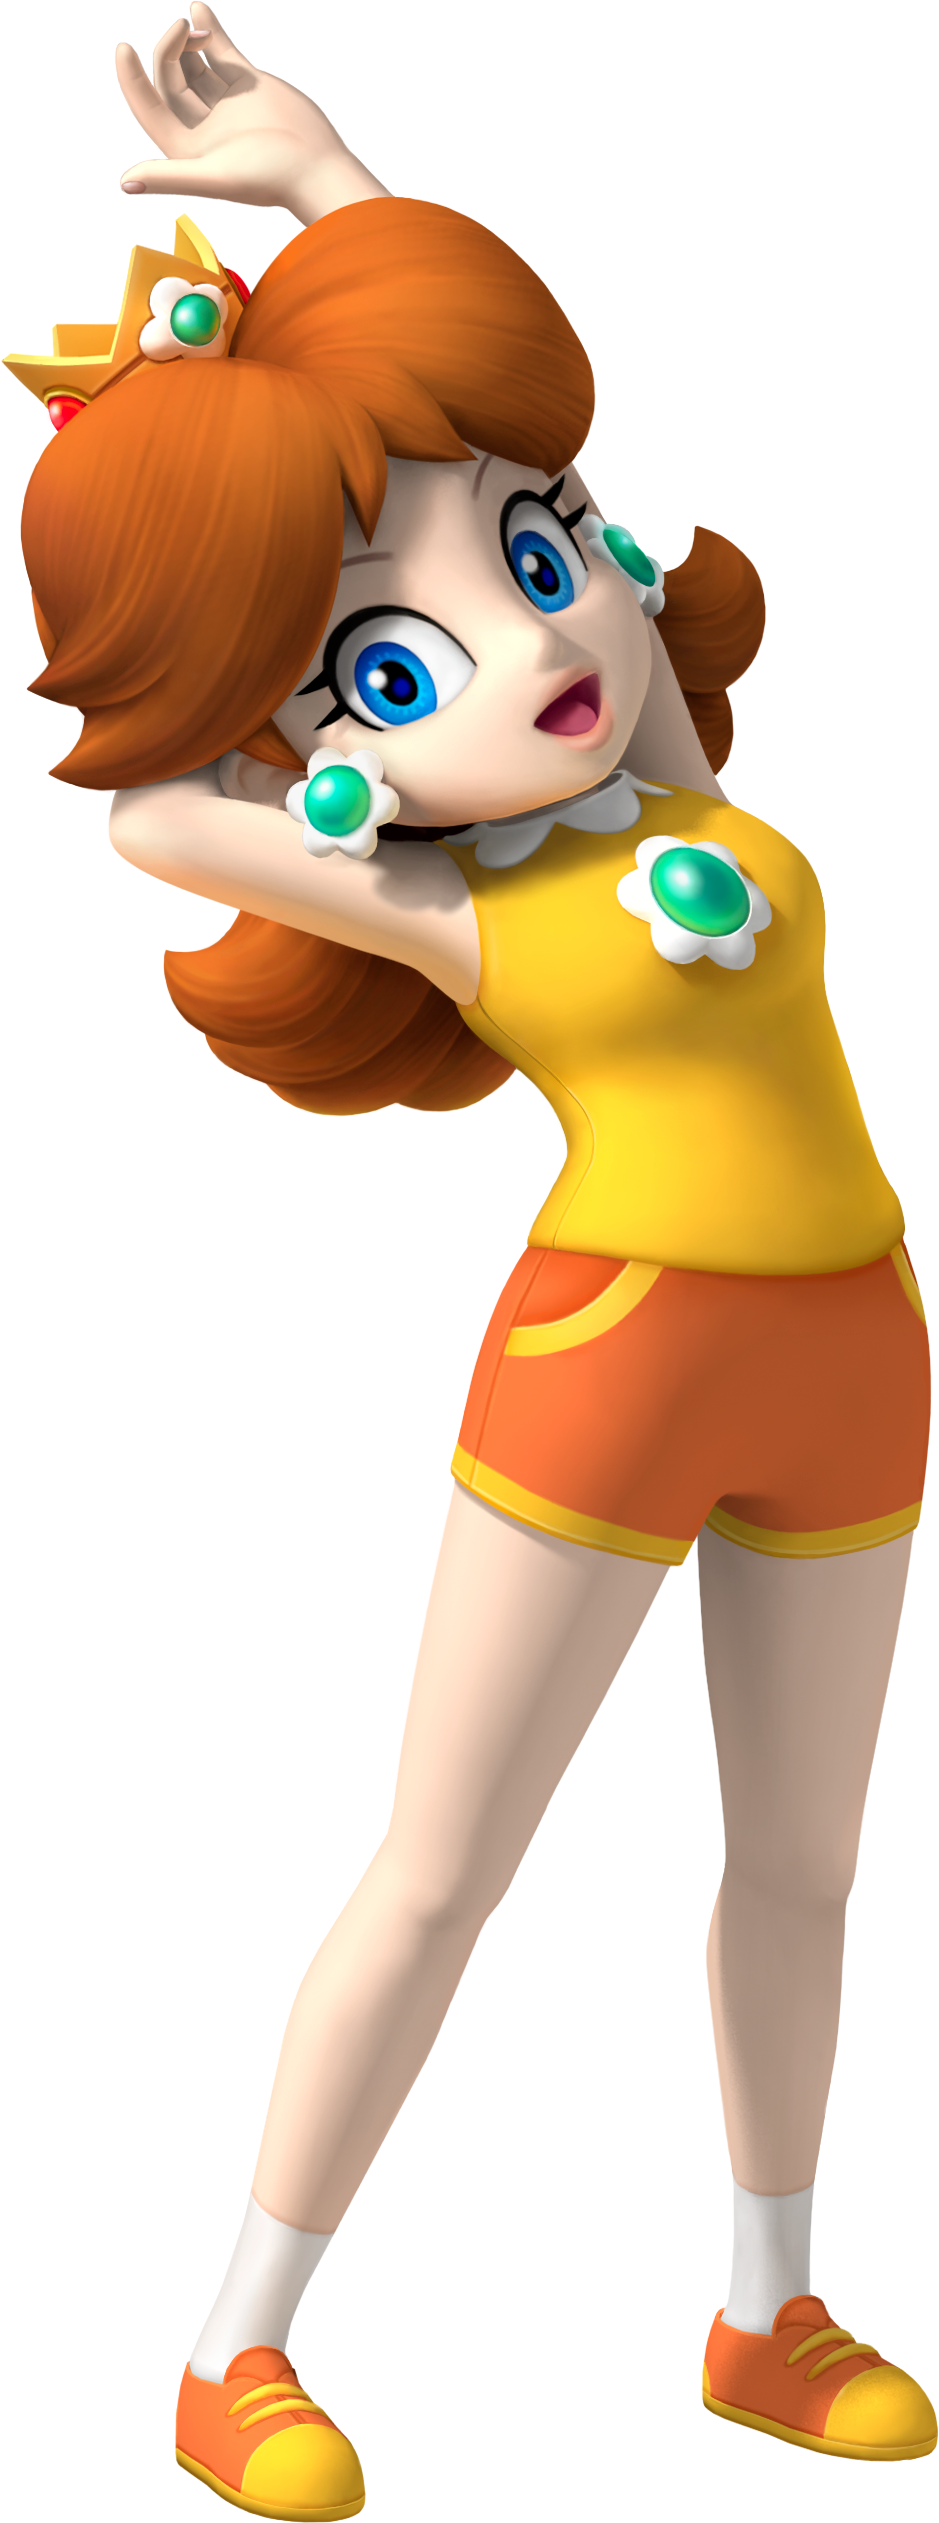 Daisy_Artwork_-_Mario_%26_Sonic_at_the_Olympic_Games.png